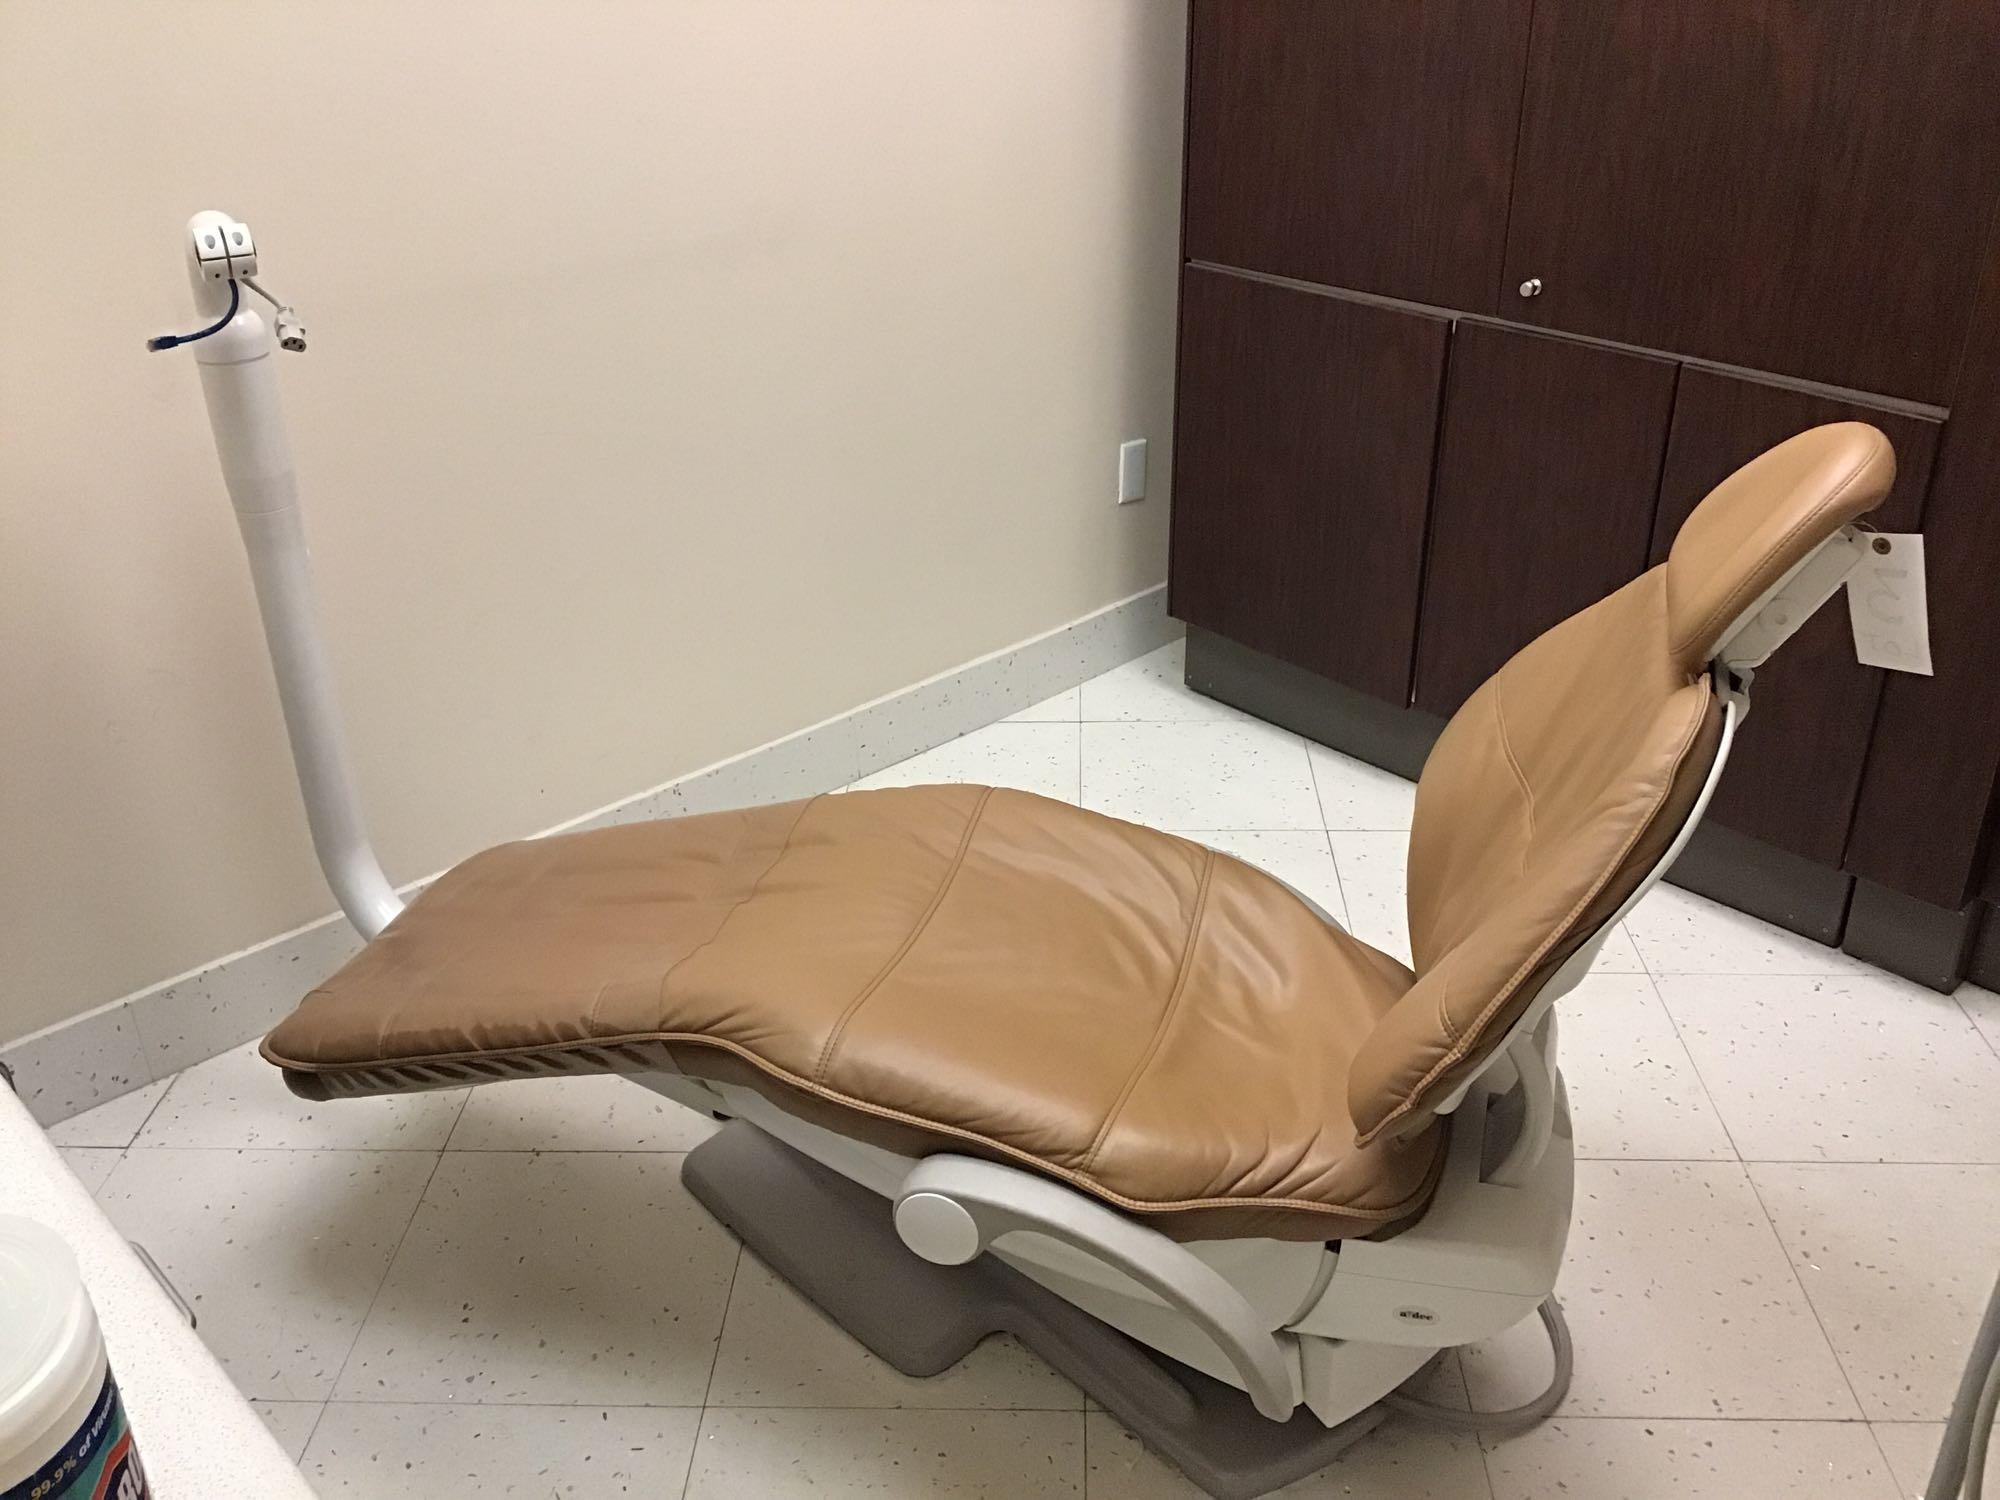 ADEC Dental Exam Chair and Delivery Unit